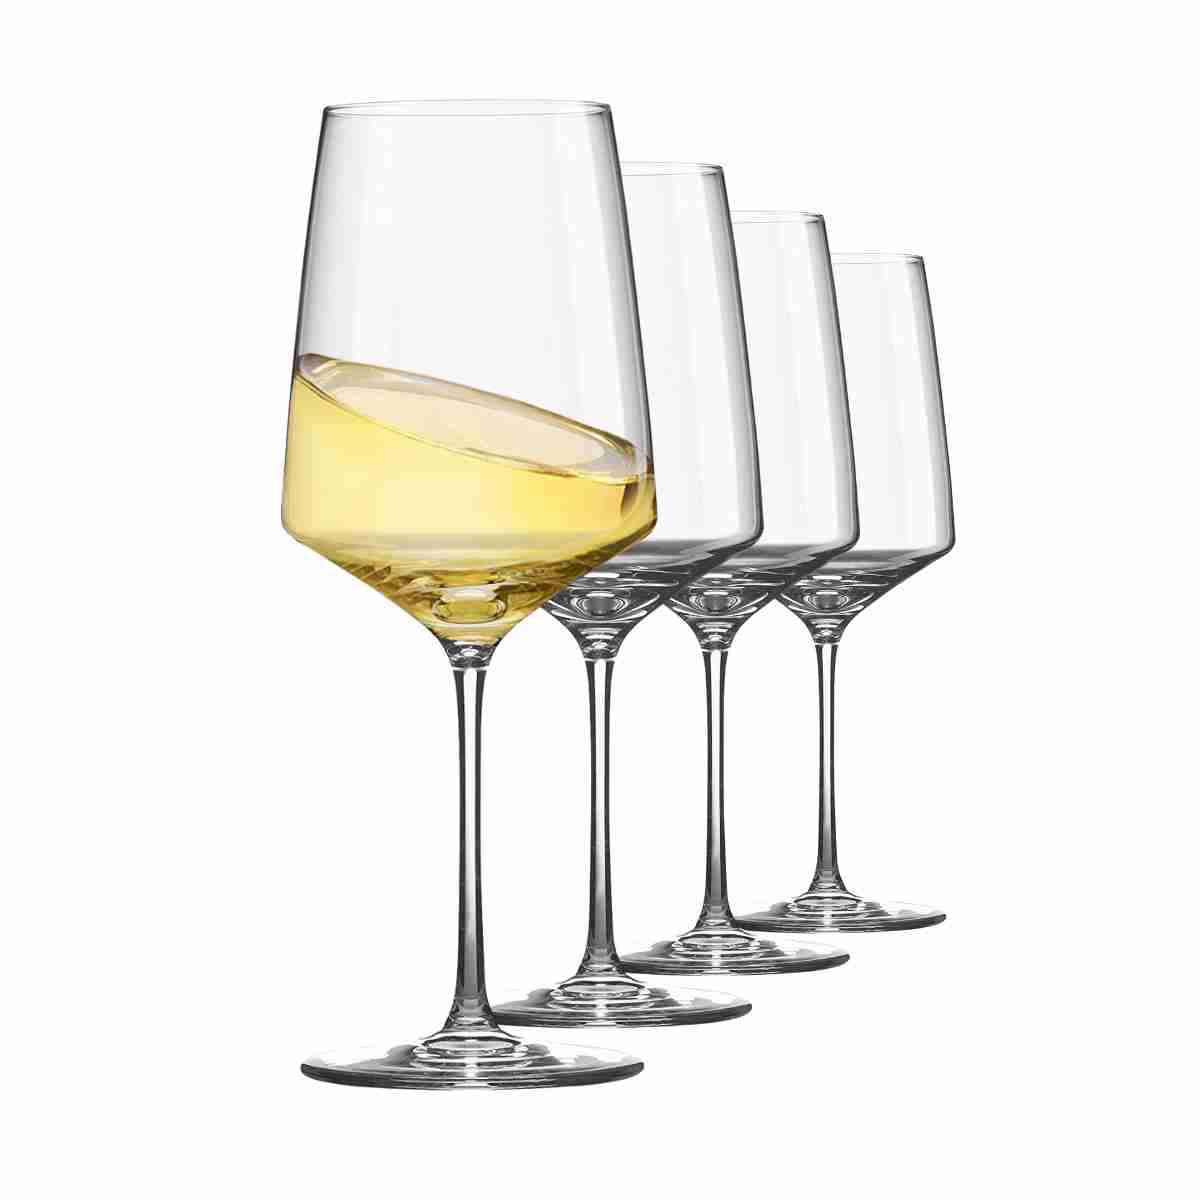 white-wine-glasses-set-of-4 with cash back rebate